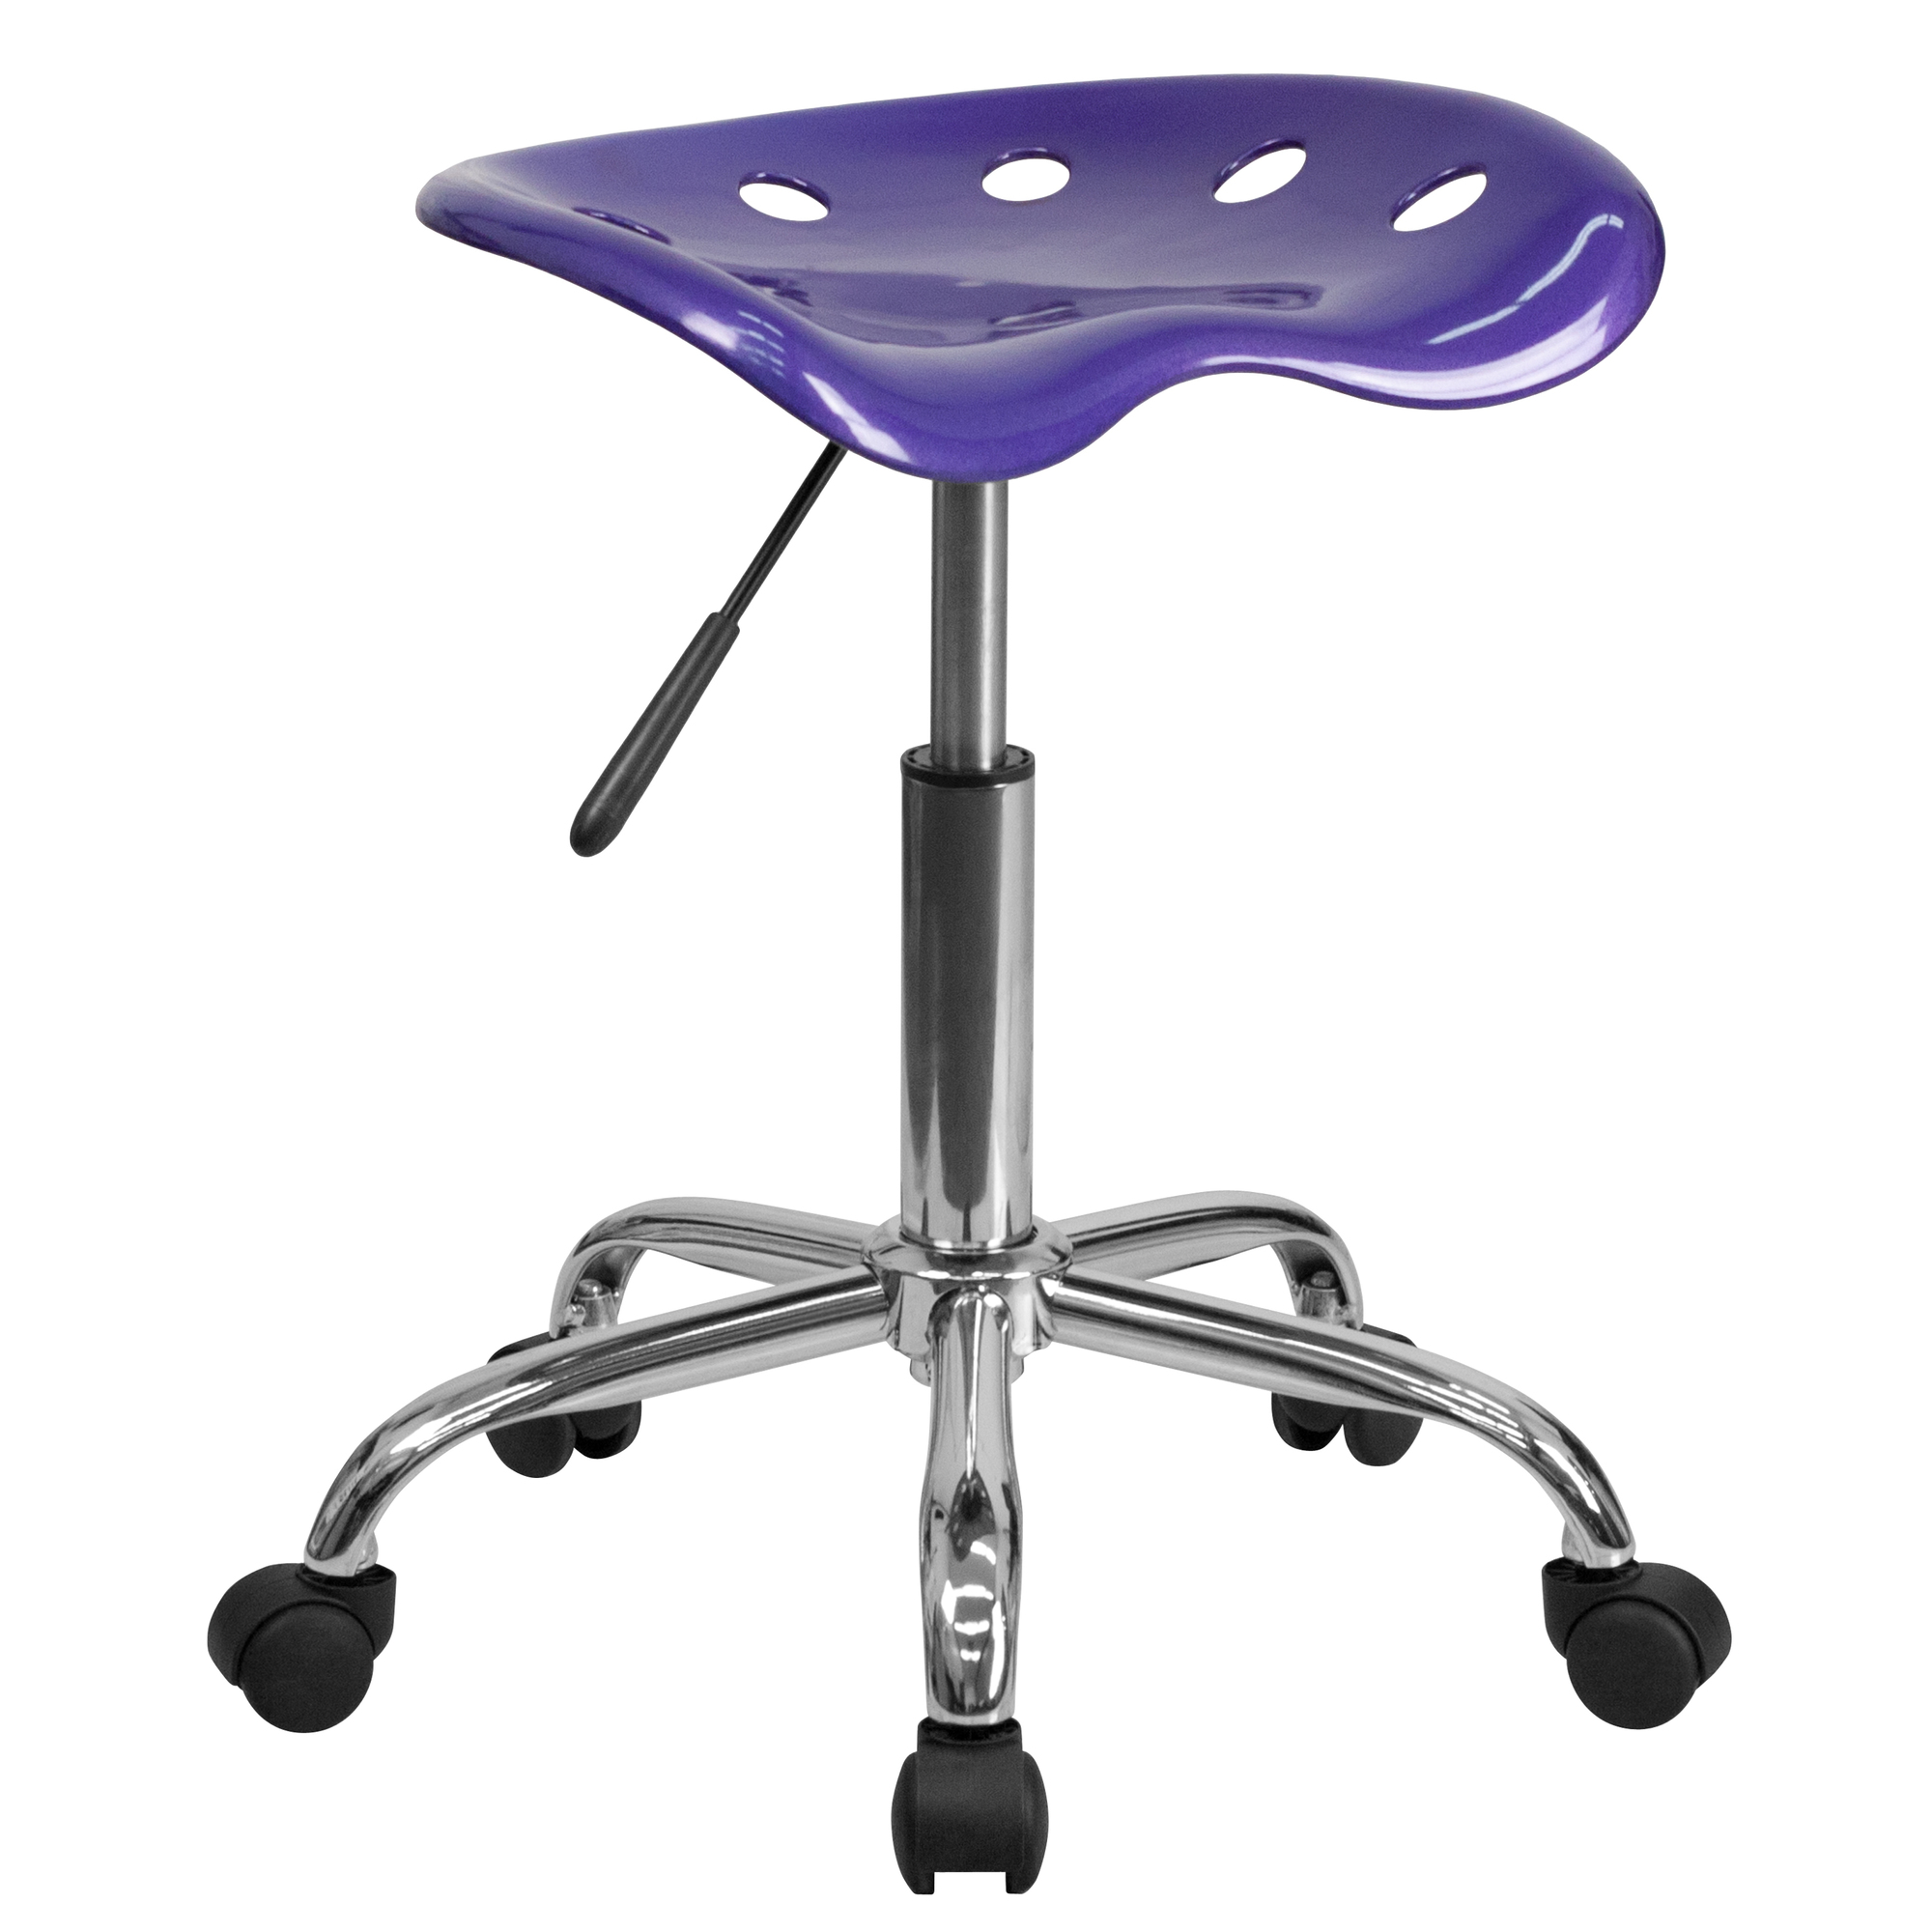 Vibrant Violet Tractor Seat and Chrome Stool, Primary Color Purple, Included (qty.) 1, Model - Flash Furniture LF214AVIOLET